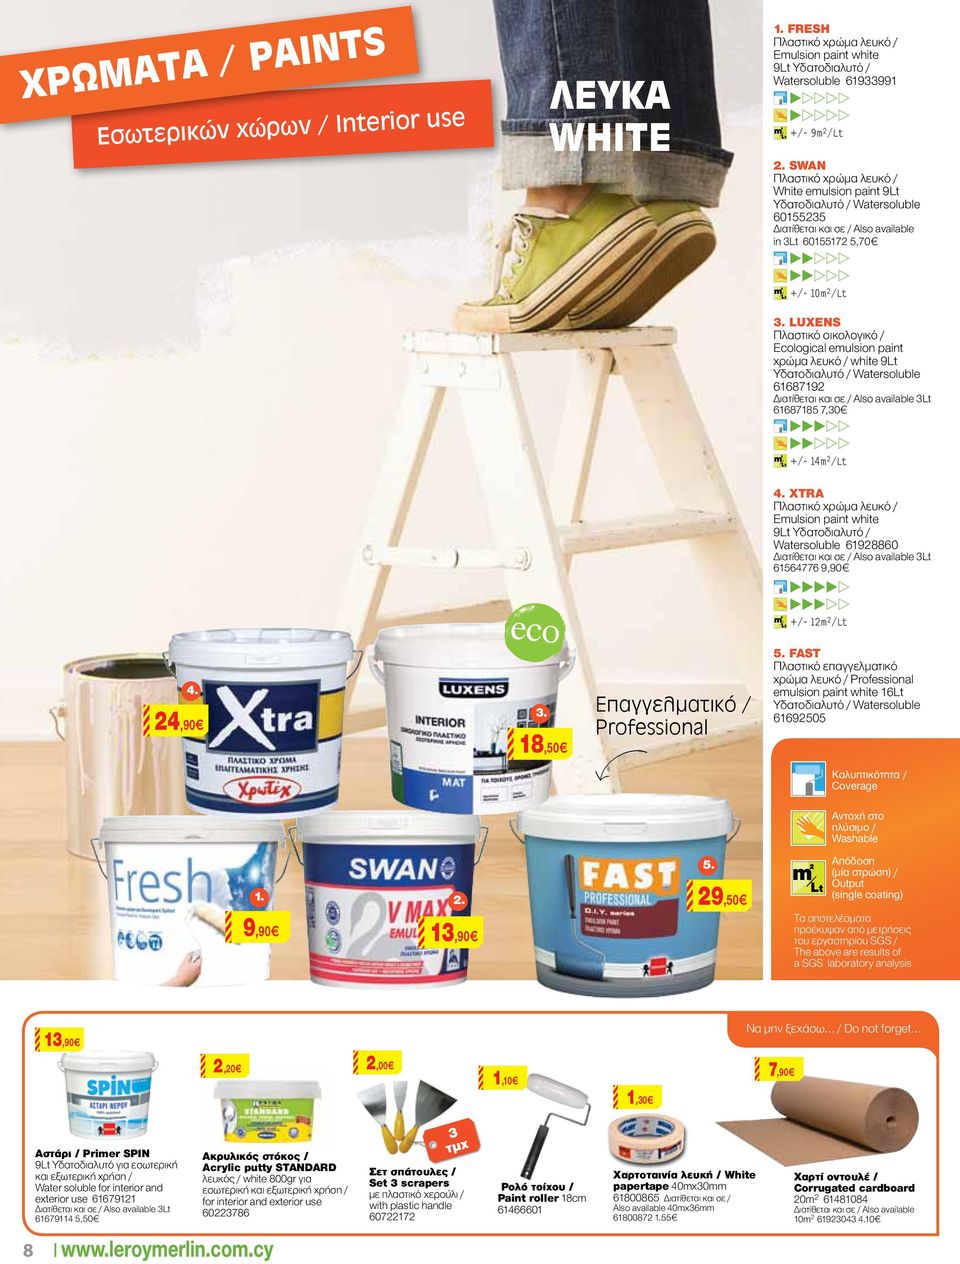 LUXENS Πλαστικό οικολογικό / Ecological emulsion paint χρώμα λευκό / white 9Lt Υδατοδιαλυτό / Watersoluble 61687192 Διατίθεται και σε / Also available 3Lt 61687185 7,30 +/- 14m2/Lt 4.